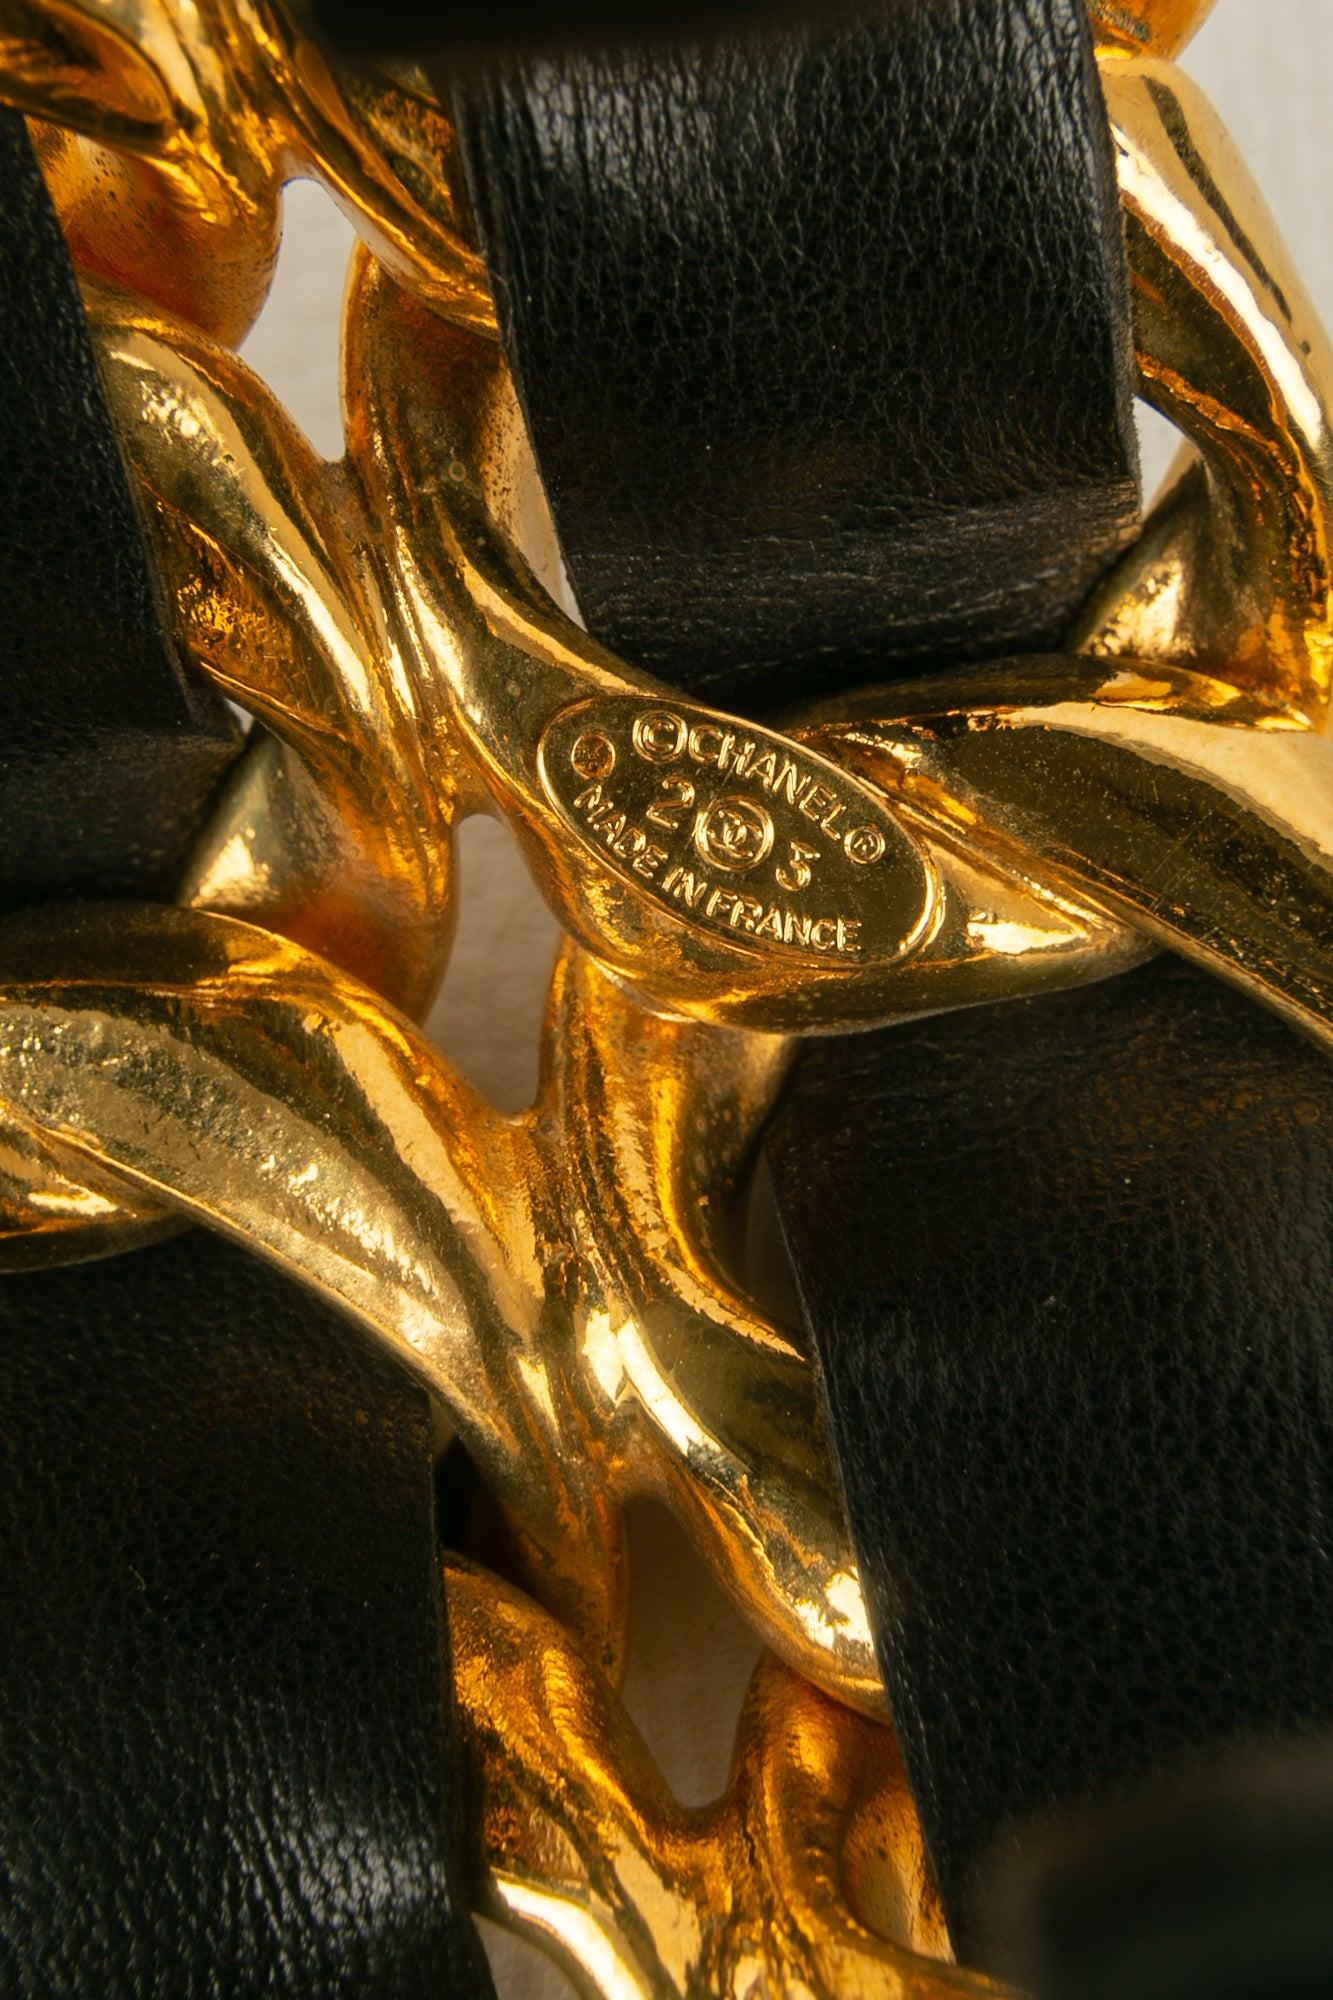 Chanel Cuff Bracelet in Golden Metal and Black Leather For Sale 3